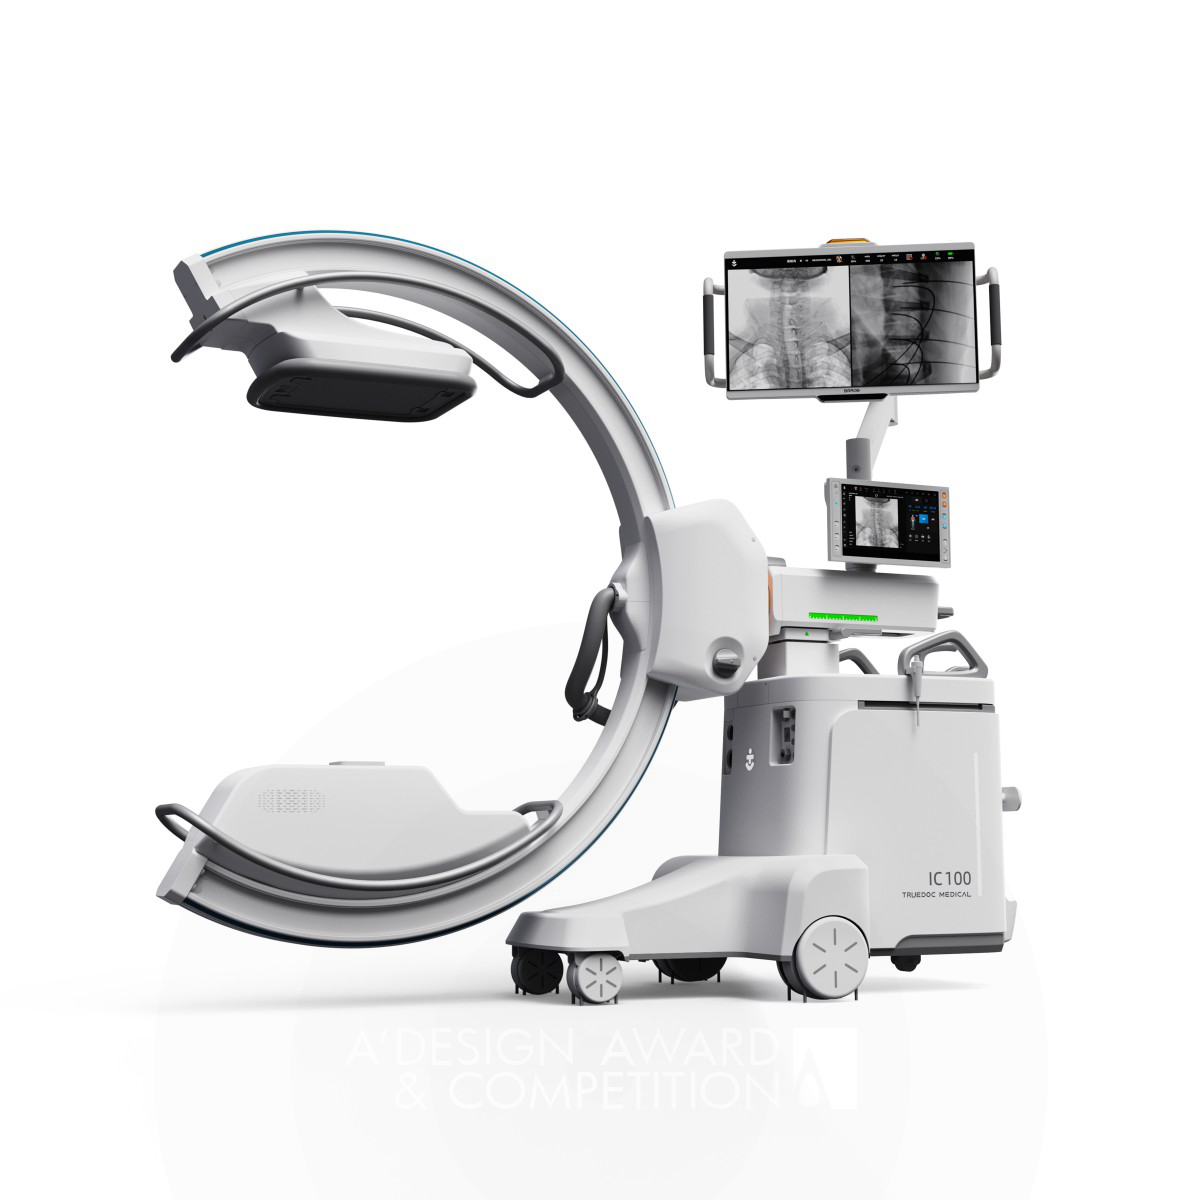 IC100 Mobile 3D X-Ray Fluoroscope Medical Device by Xuan Teng